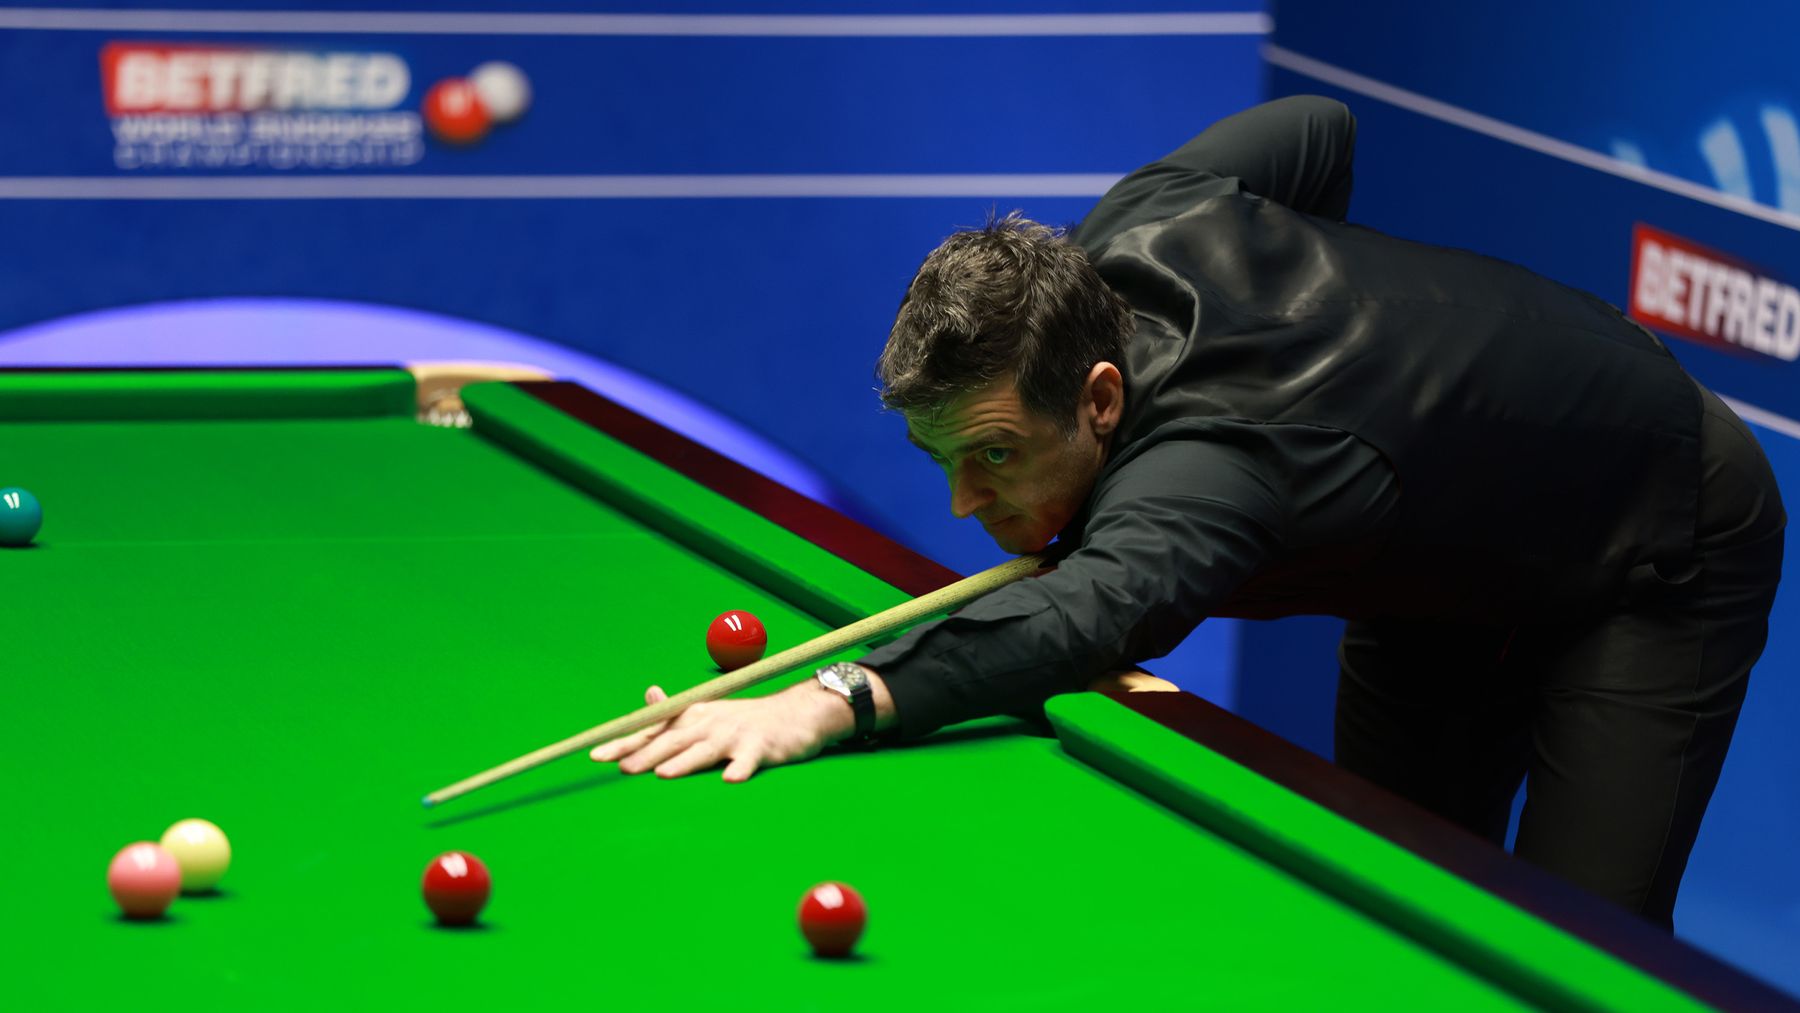 Snooker results Pigeon takes centre stage as Ronnie OSullivan leads Mark Allen 12-4 at the World Championship